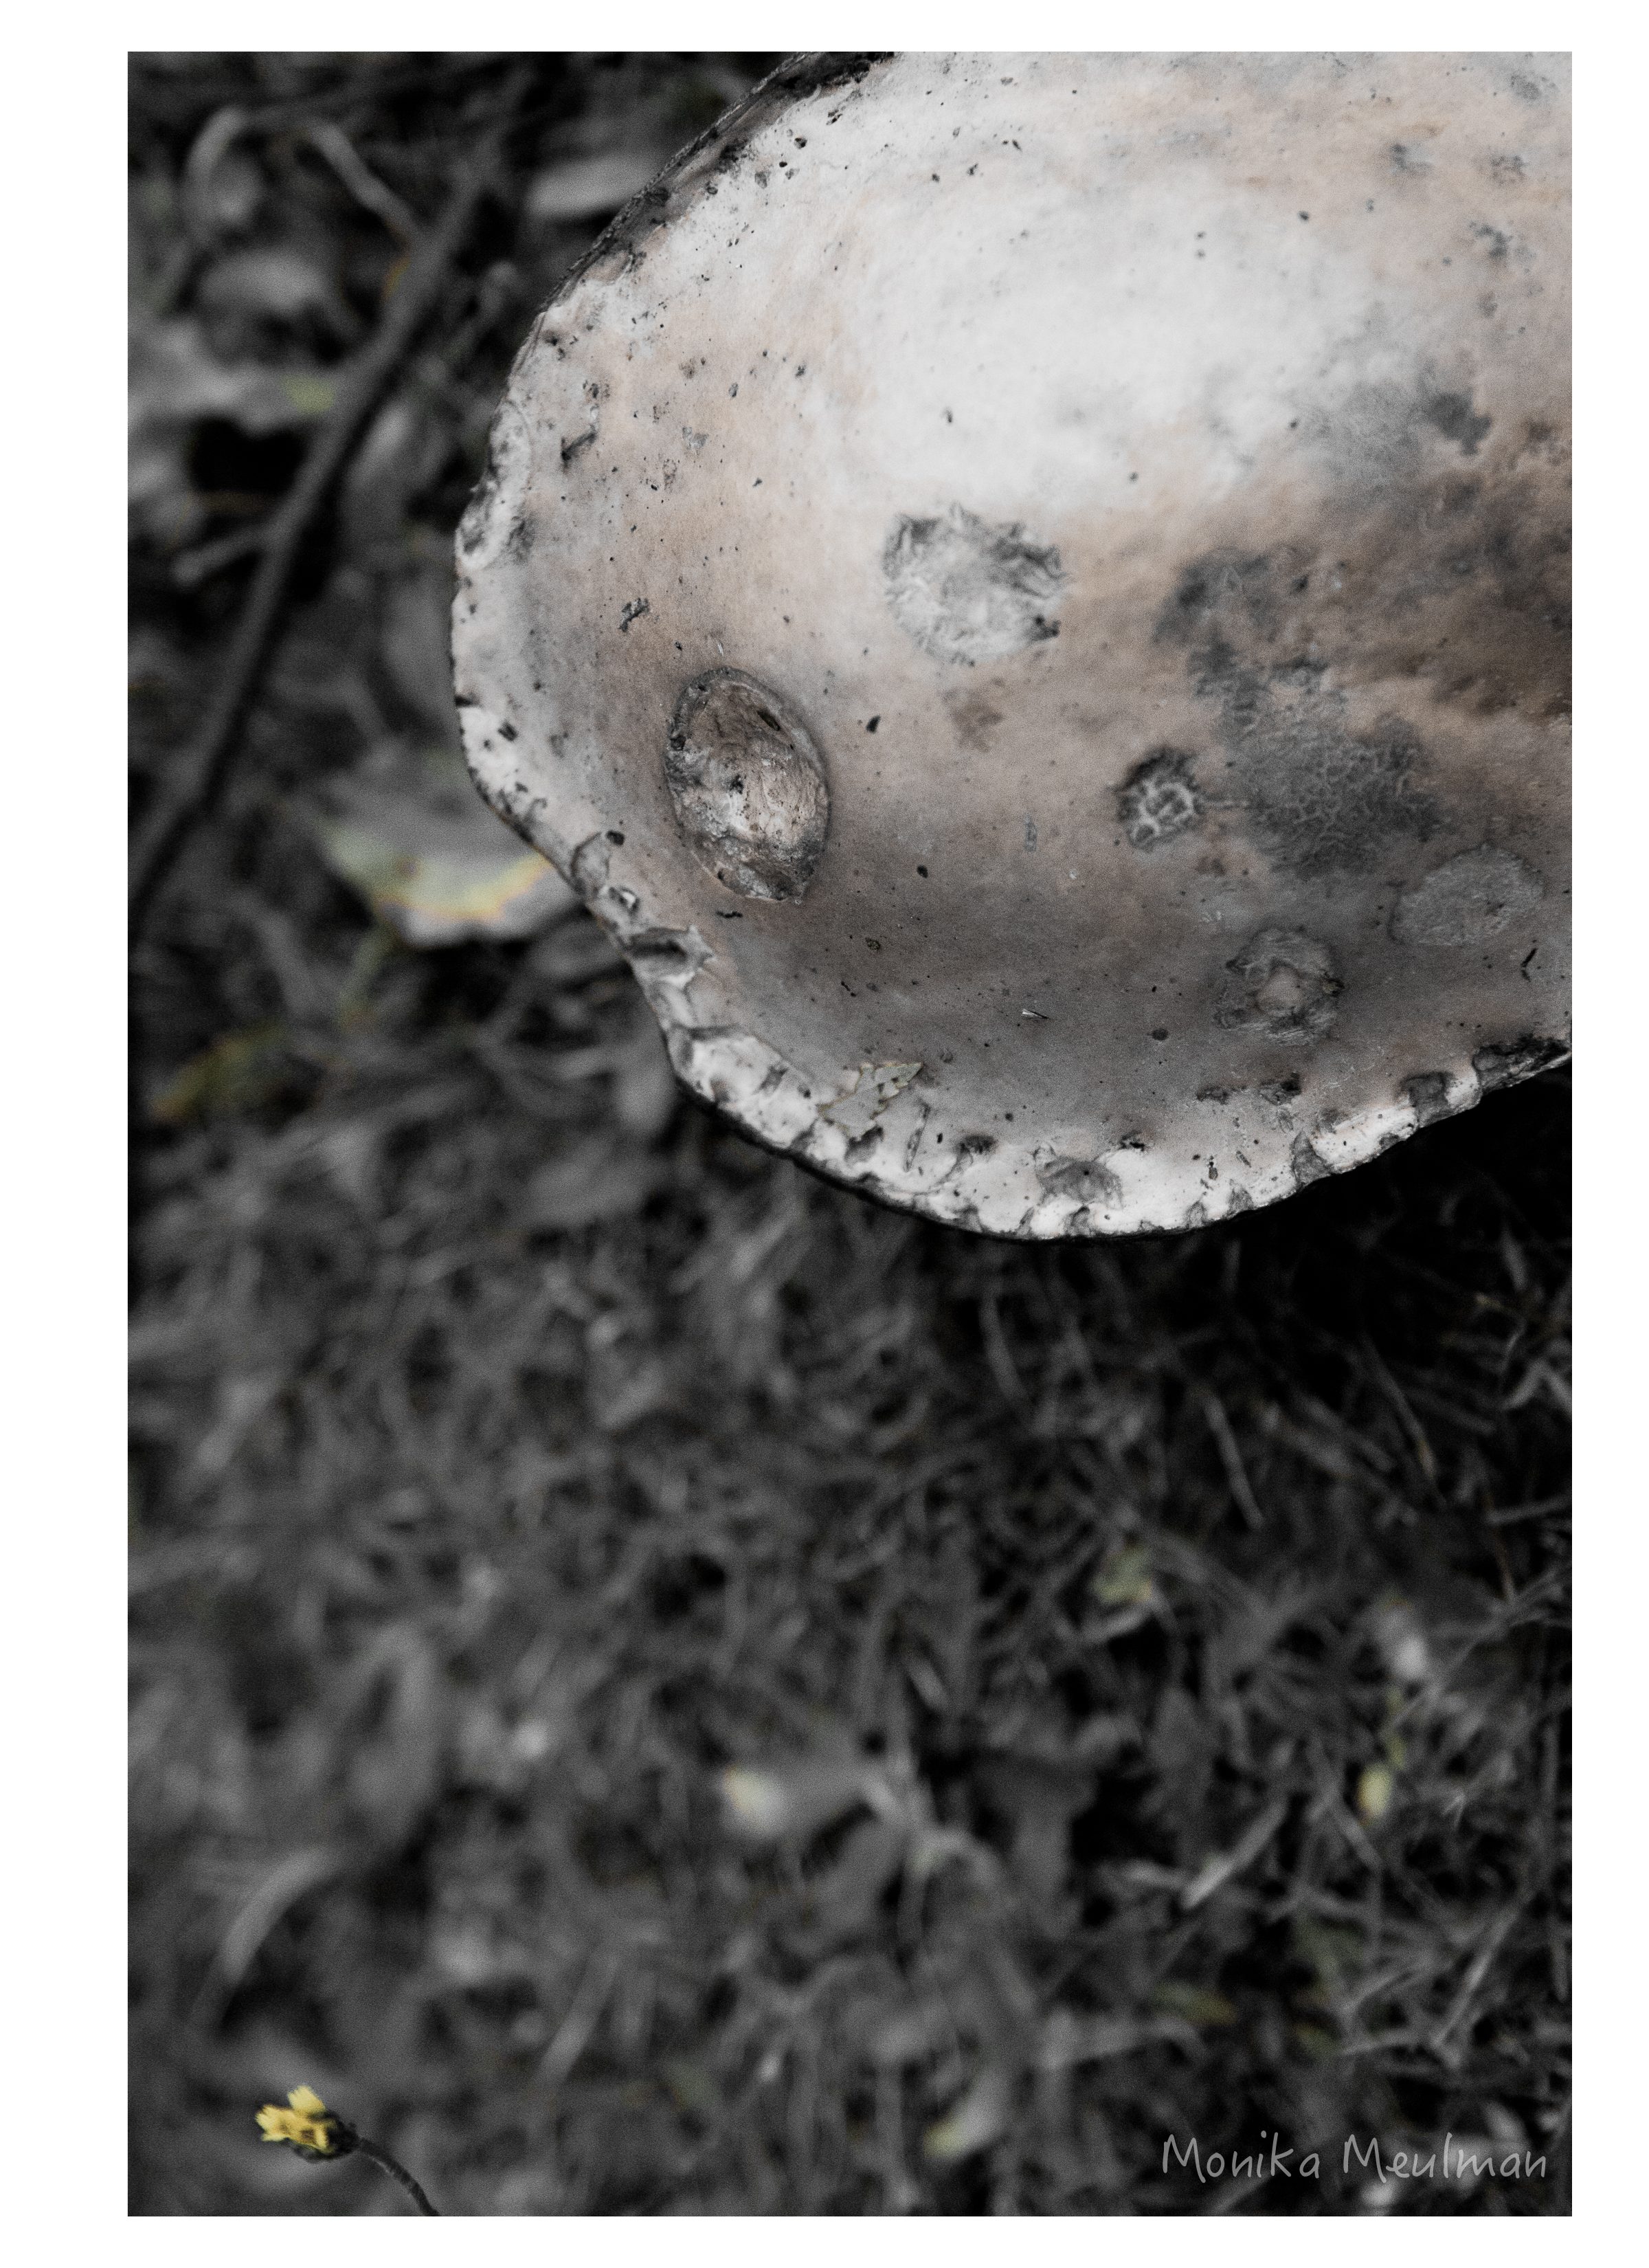 perception nature photo series sepia tone fall mushroom looks like the moon. soft yellow floral peeks at you from the bottom corner of the frame